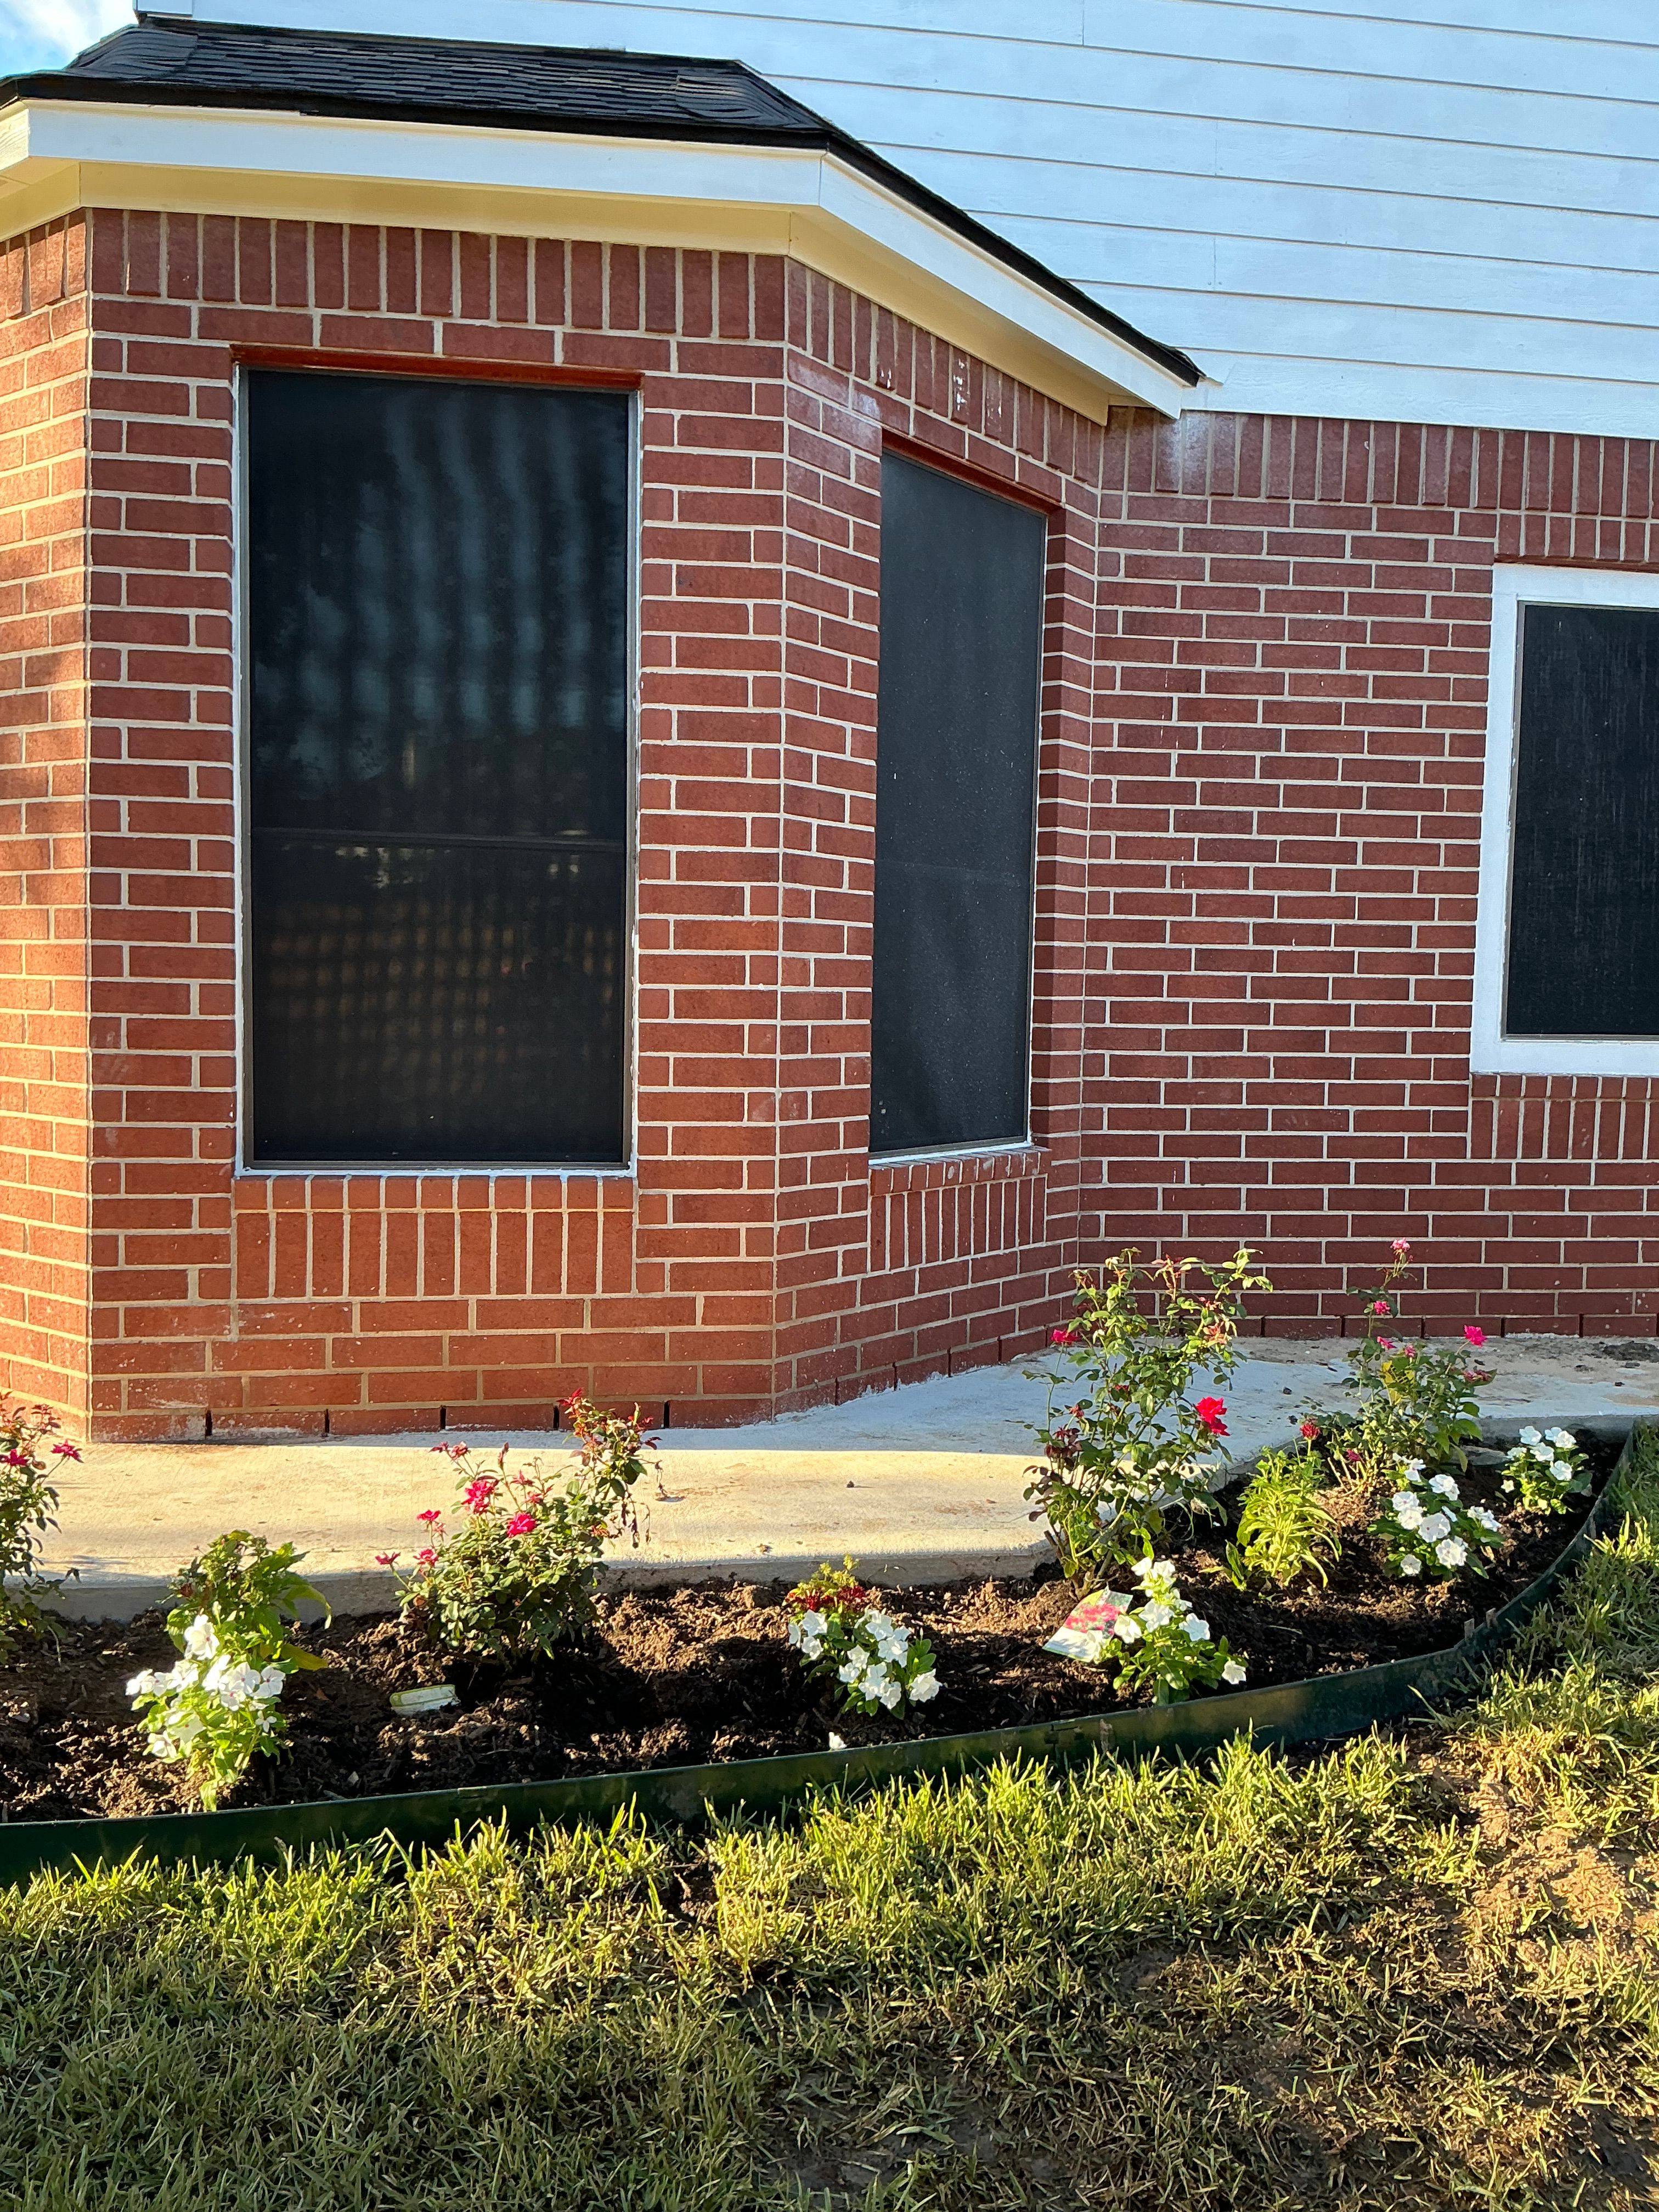 Flower beds for Silver Mines Landscape & Construction, LLC. in Houston, TX